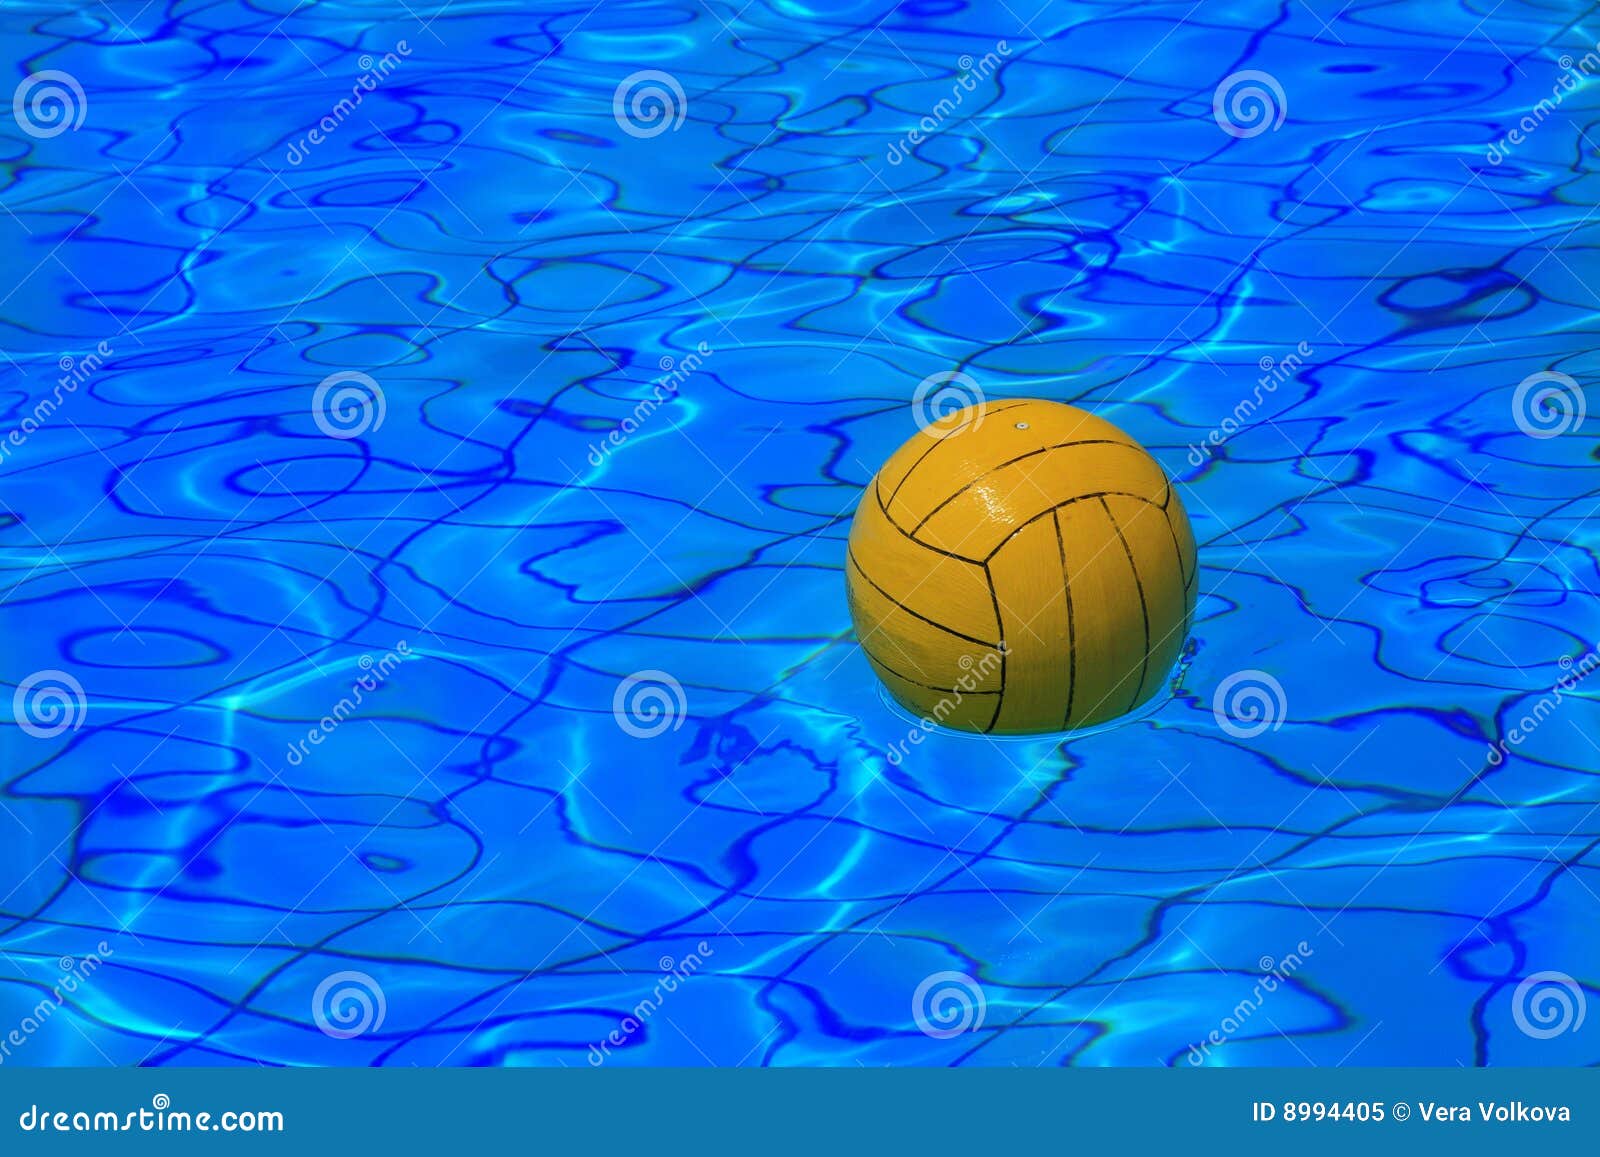 yellow water polo ball on water background